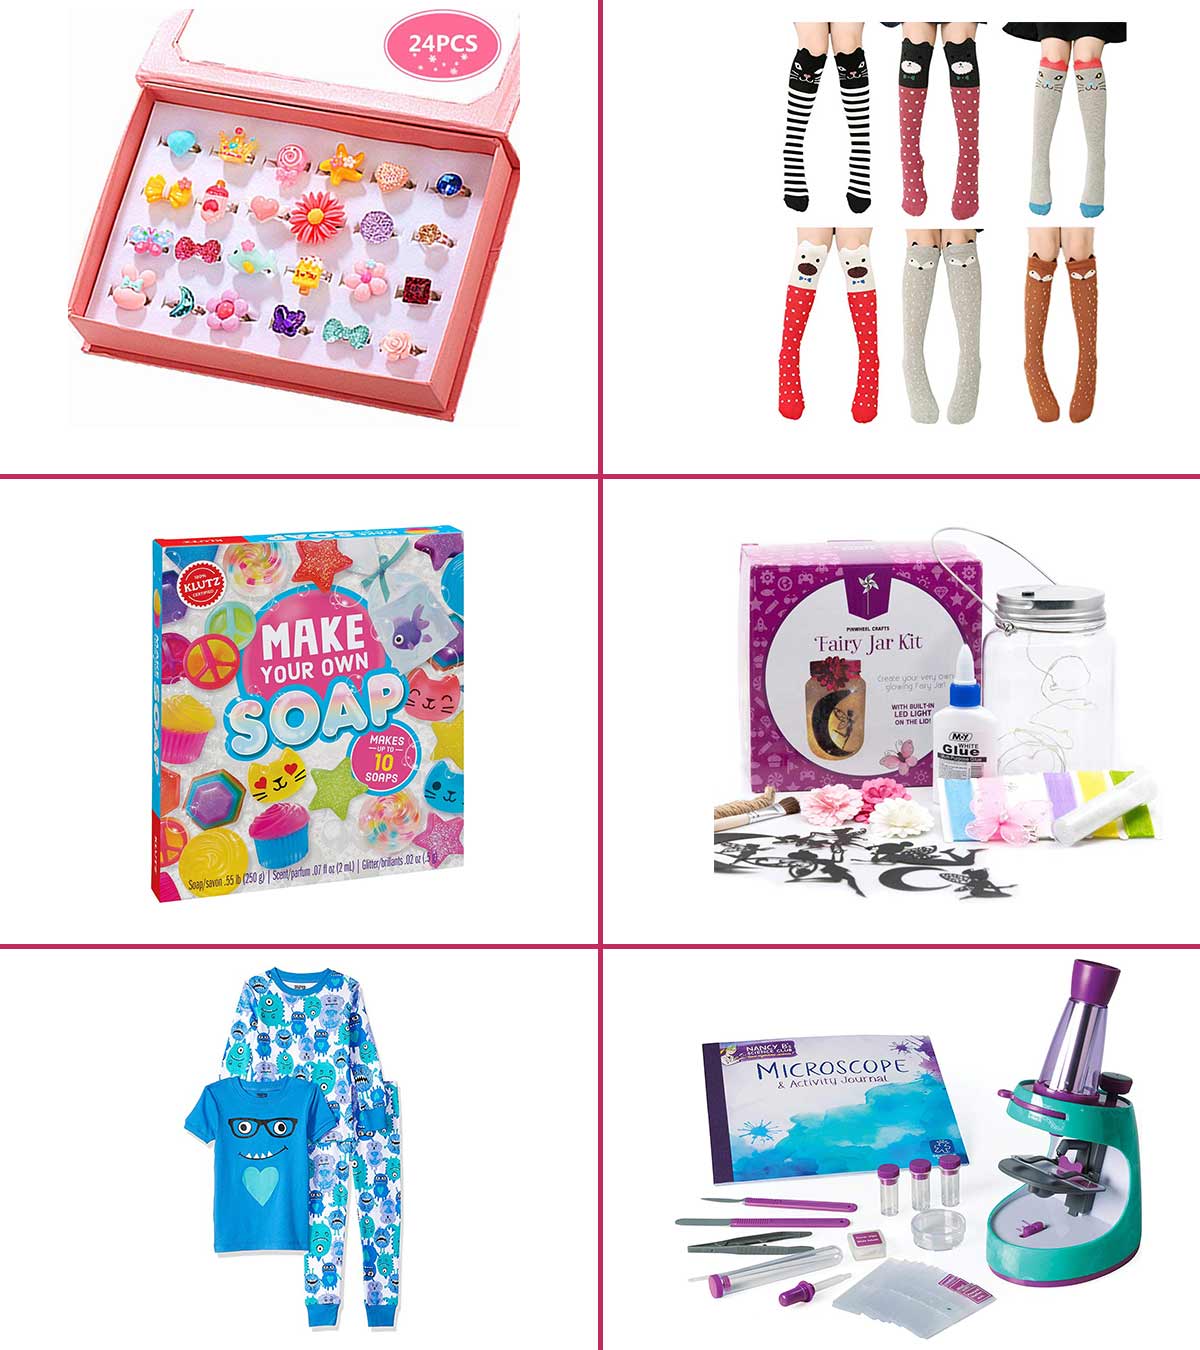 The Ultimate List of Top Girl Gifts for 8-10 Year Olds